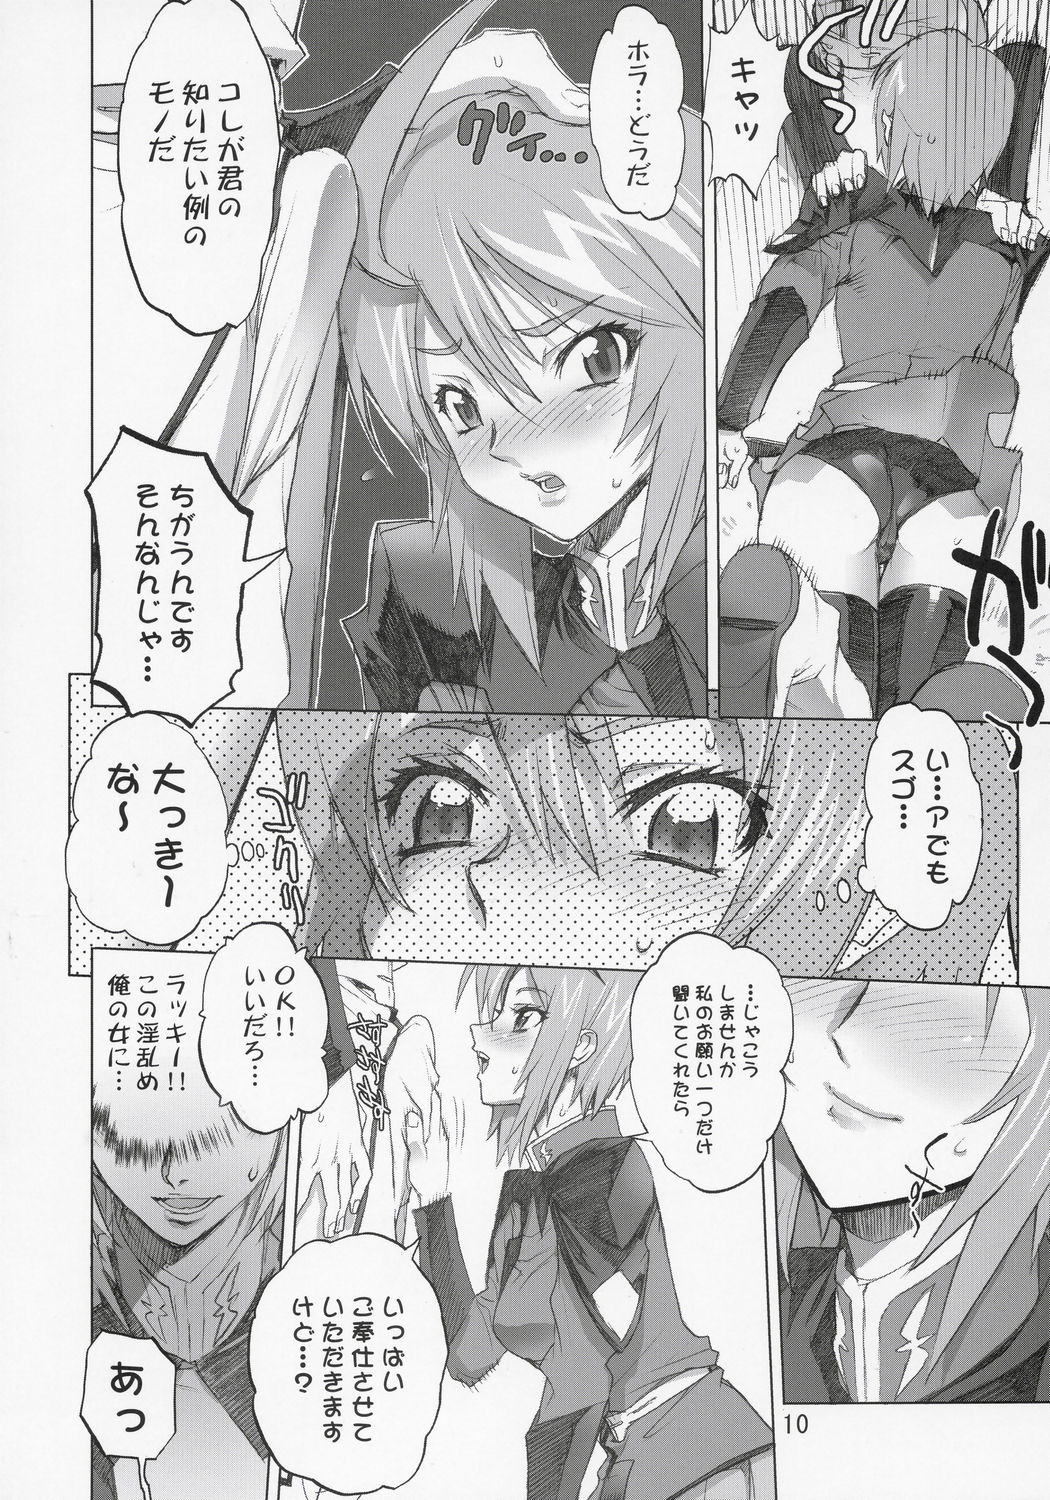 (C69) [Digital Accel Works] Inazuma Warrior 2 (Various) page 9 full